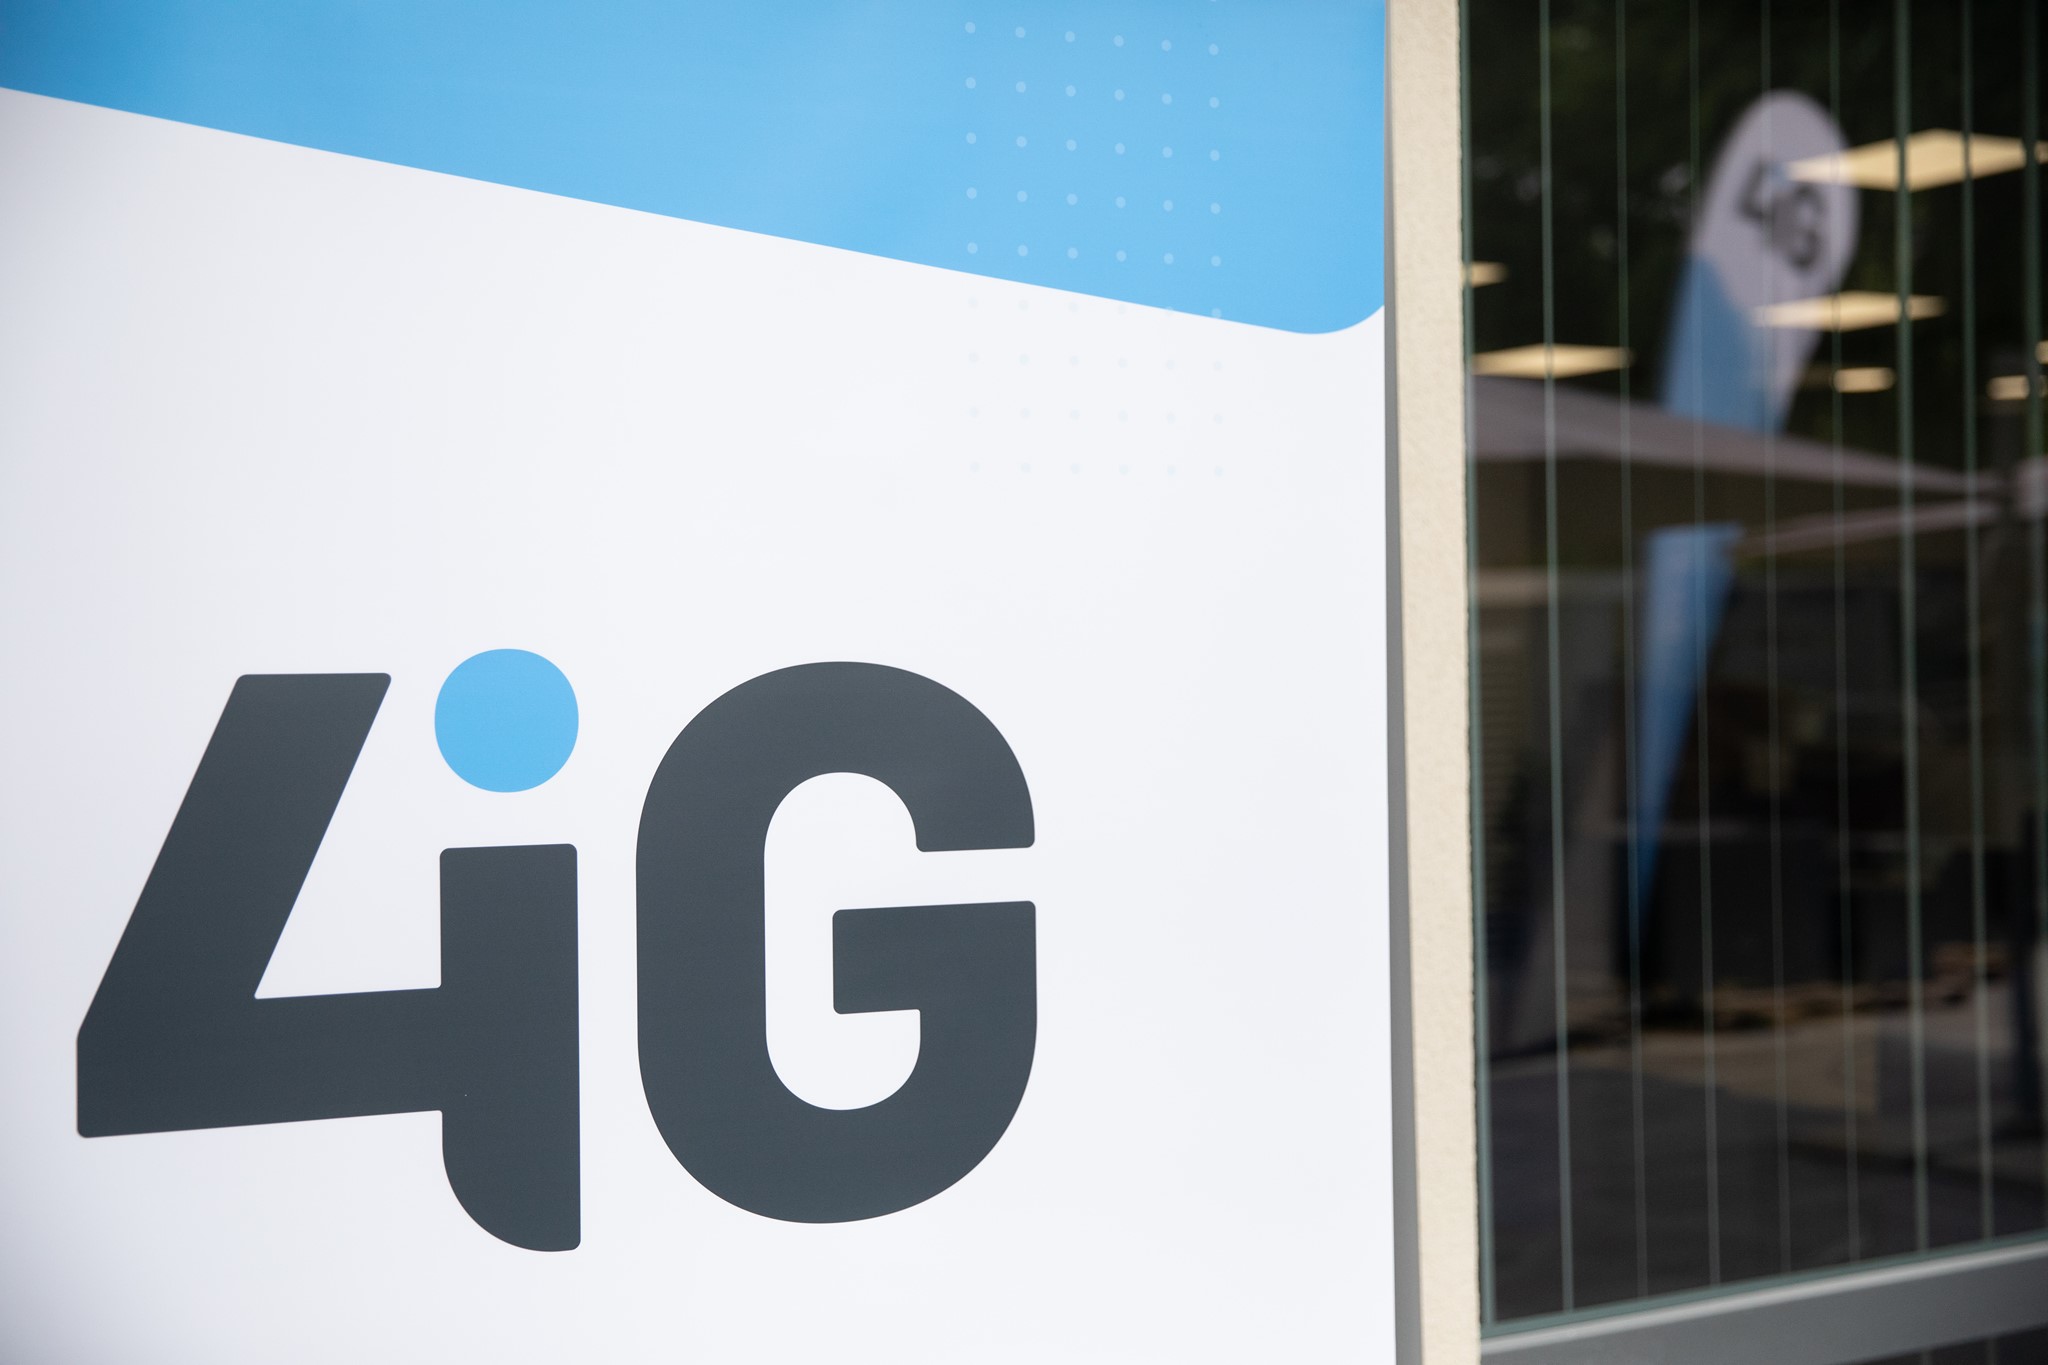 4iG to acquire controlling stake in Albanian telco